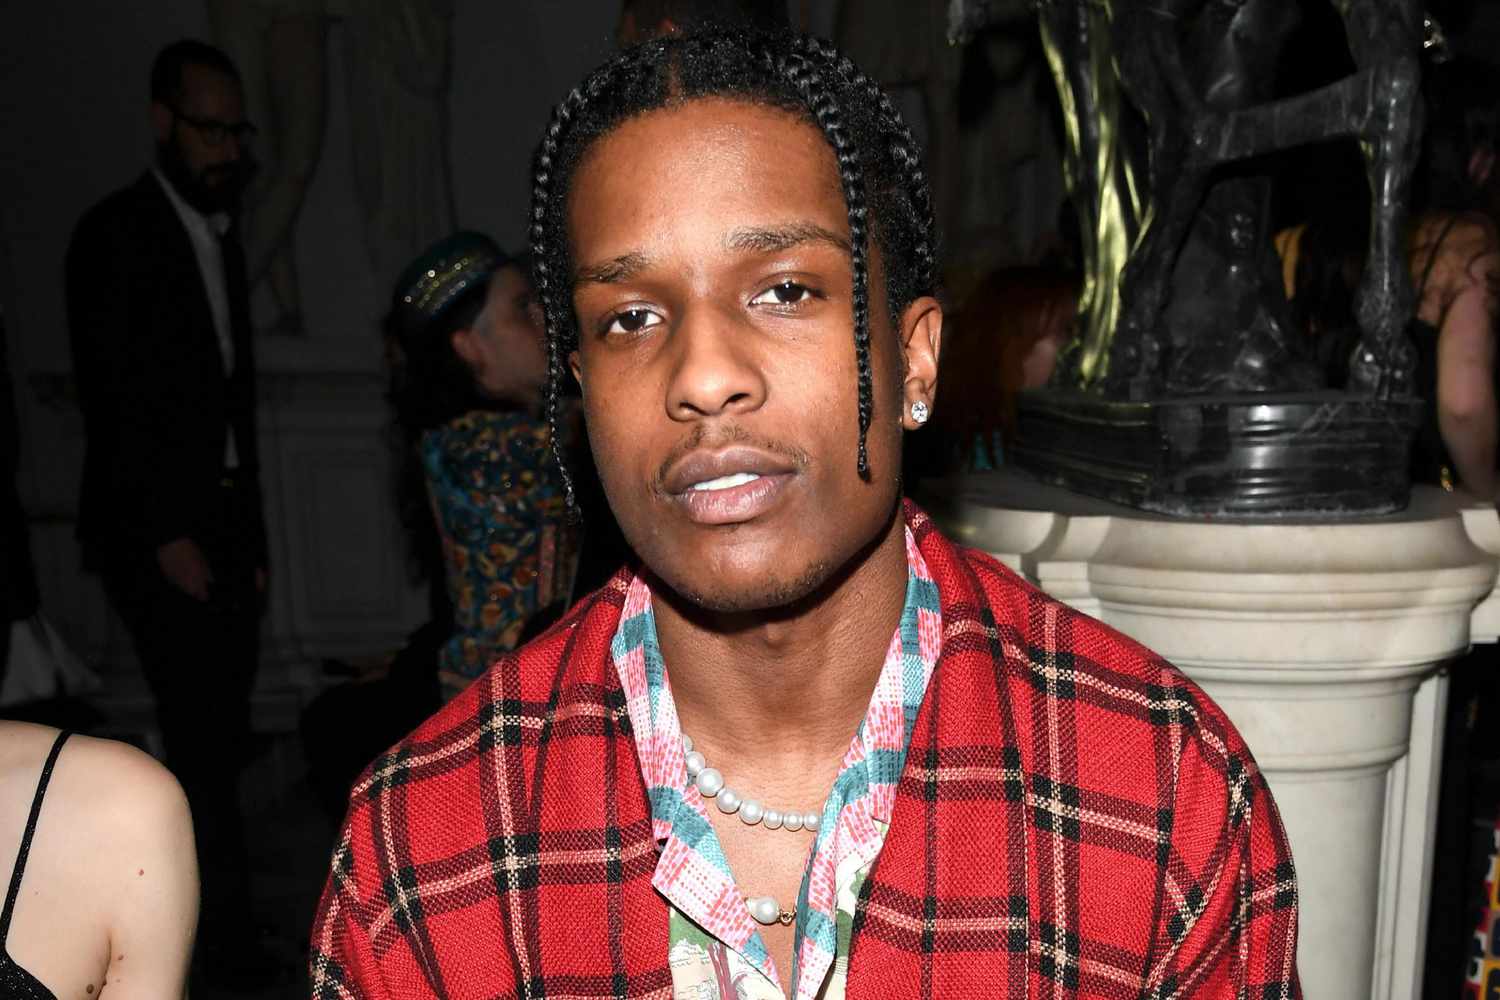 ROME, ITALY - MAY 28: Rakim Mayers, aka A$AP Rocky, attends Gucci Cruise 2020 at Musei Capitolini on May 28, 2019 in Rome, Italy. (Photo by Daniele Venturelli/Daniele Venturelli/ Getty Images for Gucci)